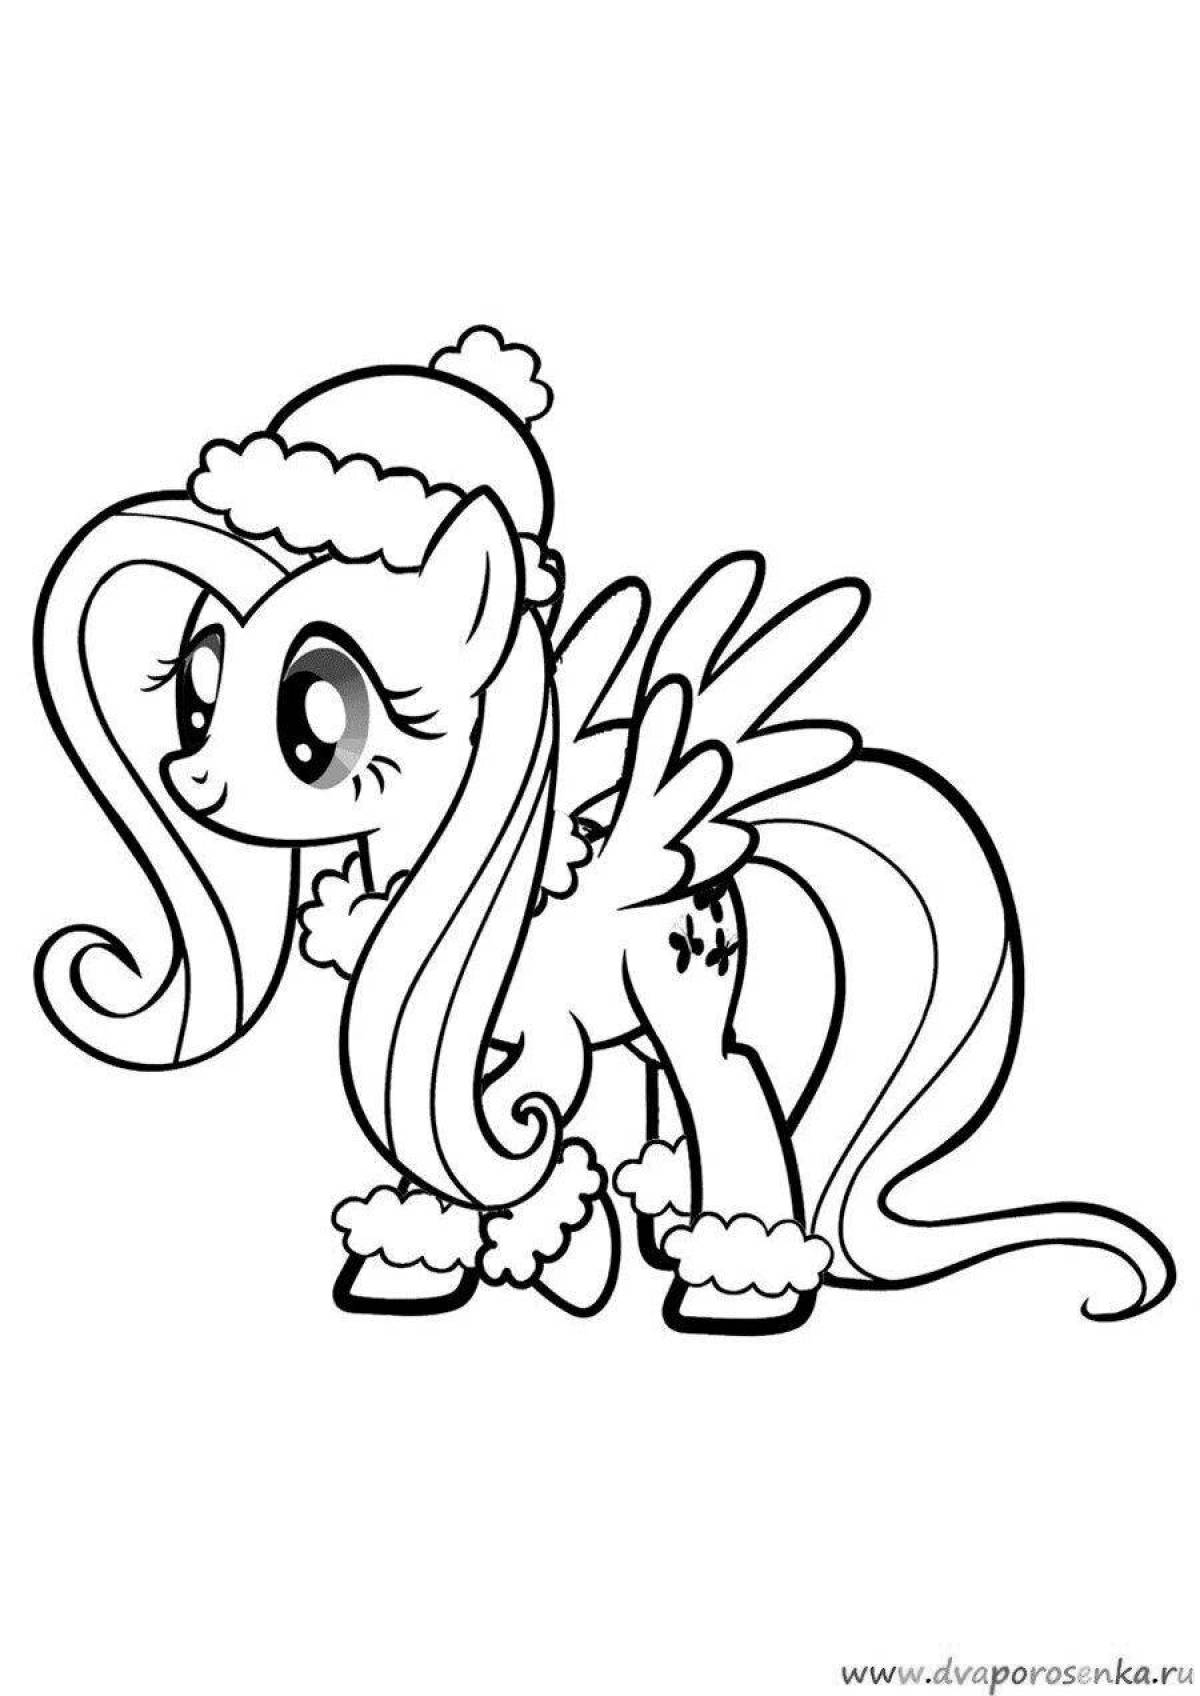 Cute Christmas pony coloring page